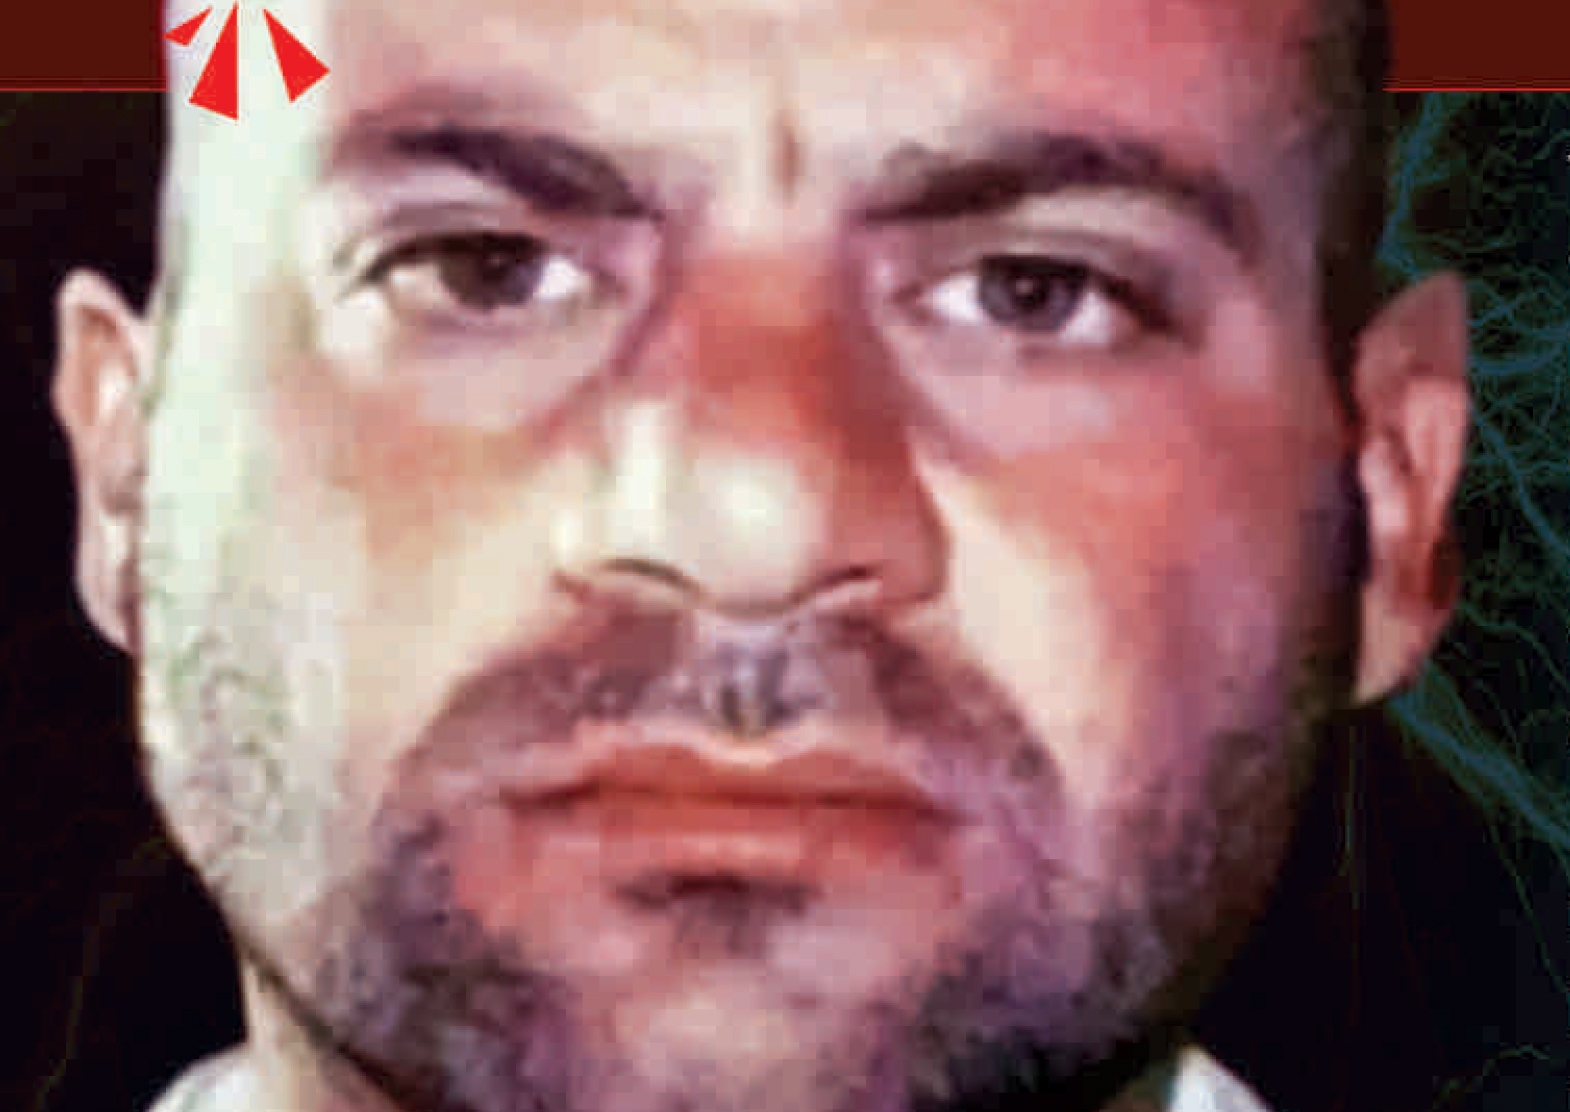 Mawla was arrested in 2008 by US forces and interrogated in Umm Qasr, southern Iraq, at Camp Bucca.